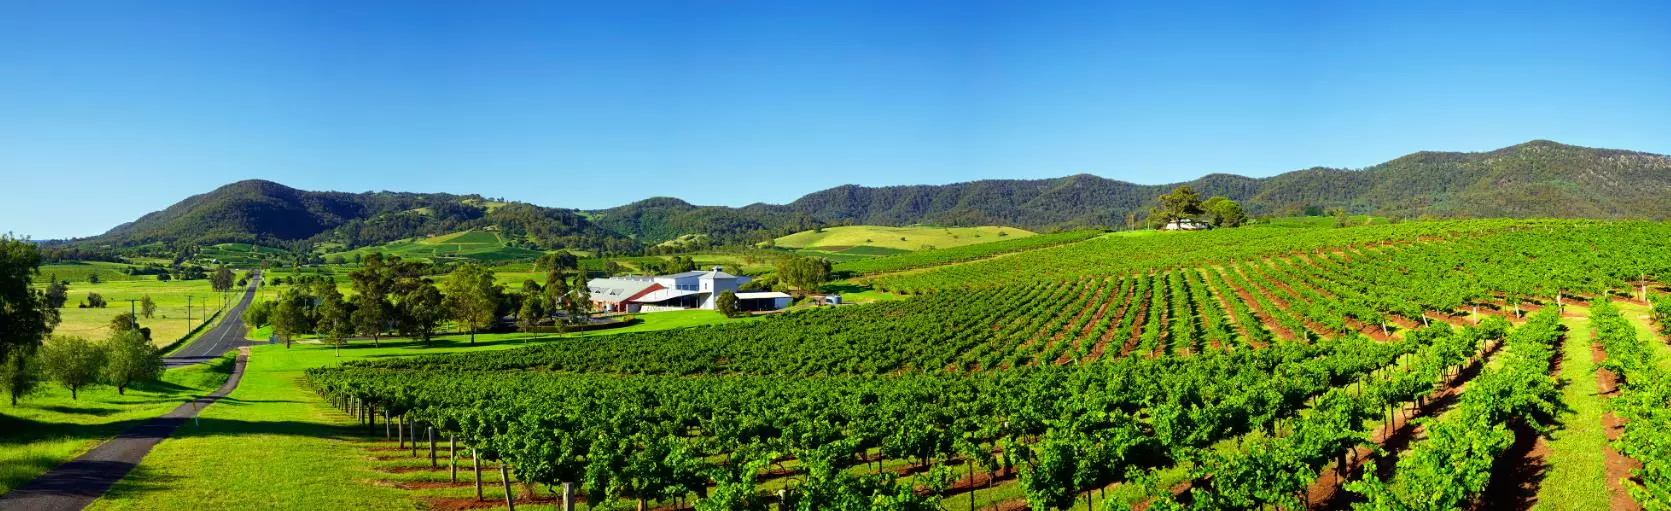 Hunter Valley Wine Tour, Planning a Hunter Valley Wine Tour?, GlowAfter